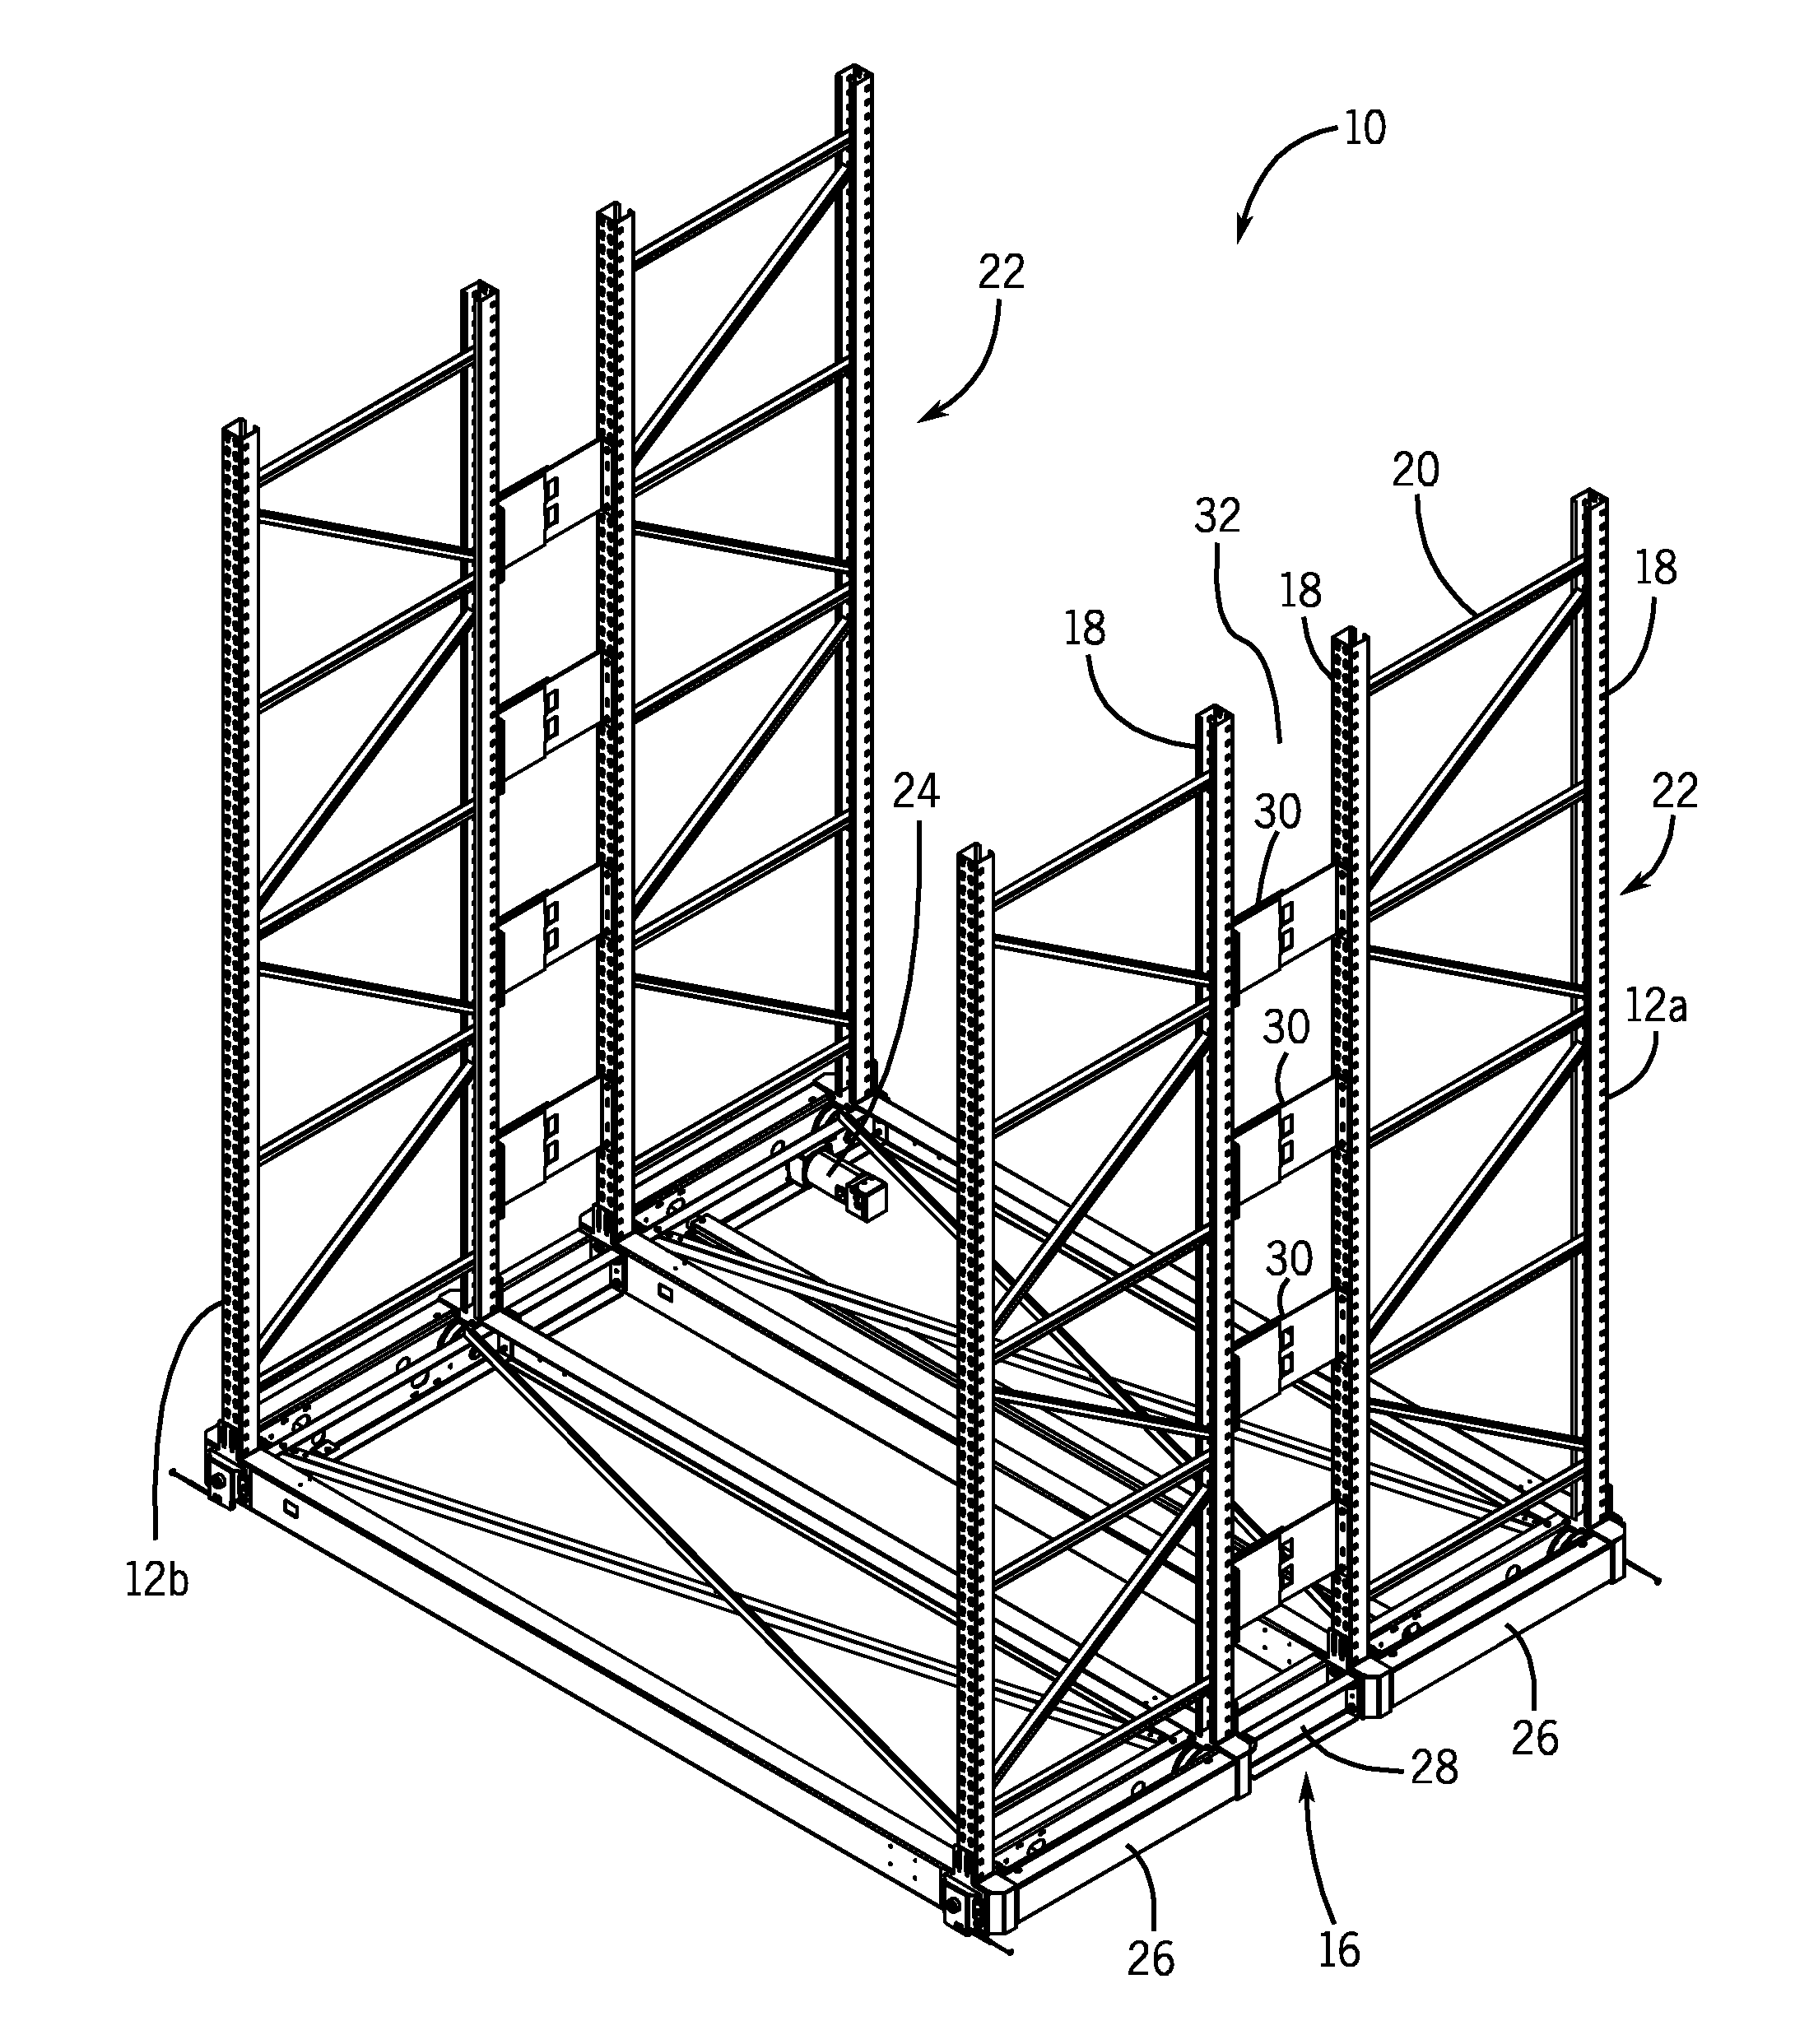 Structural articulation joint for high density mobile carriage